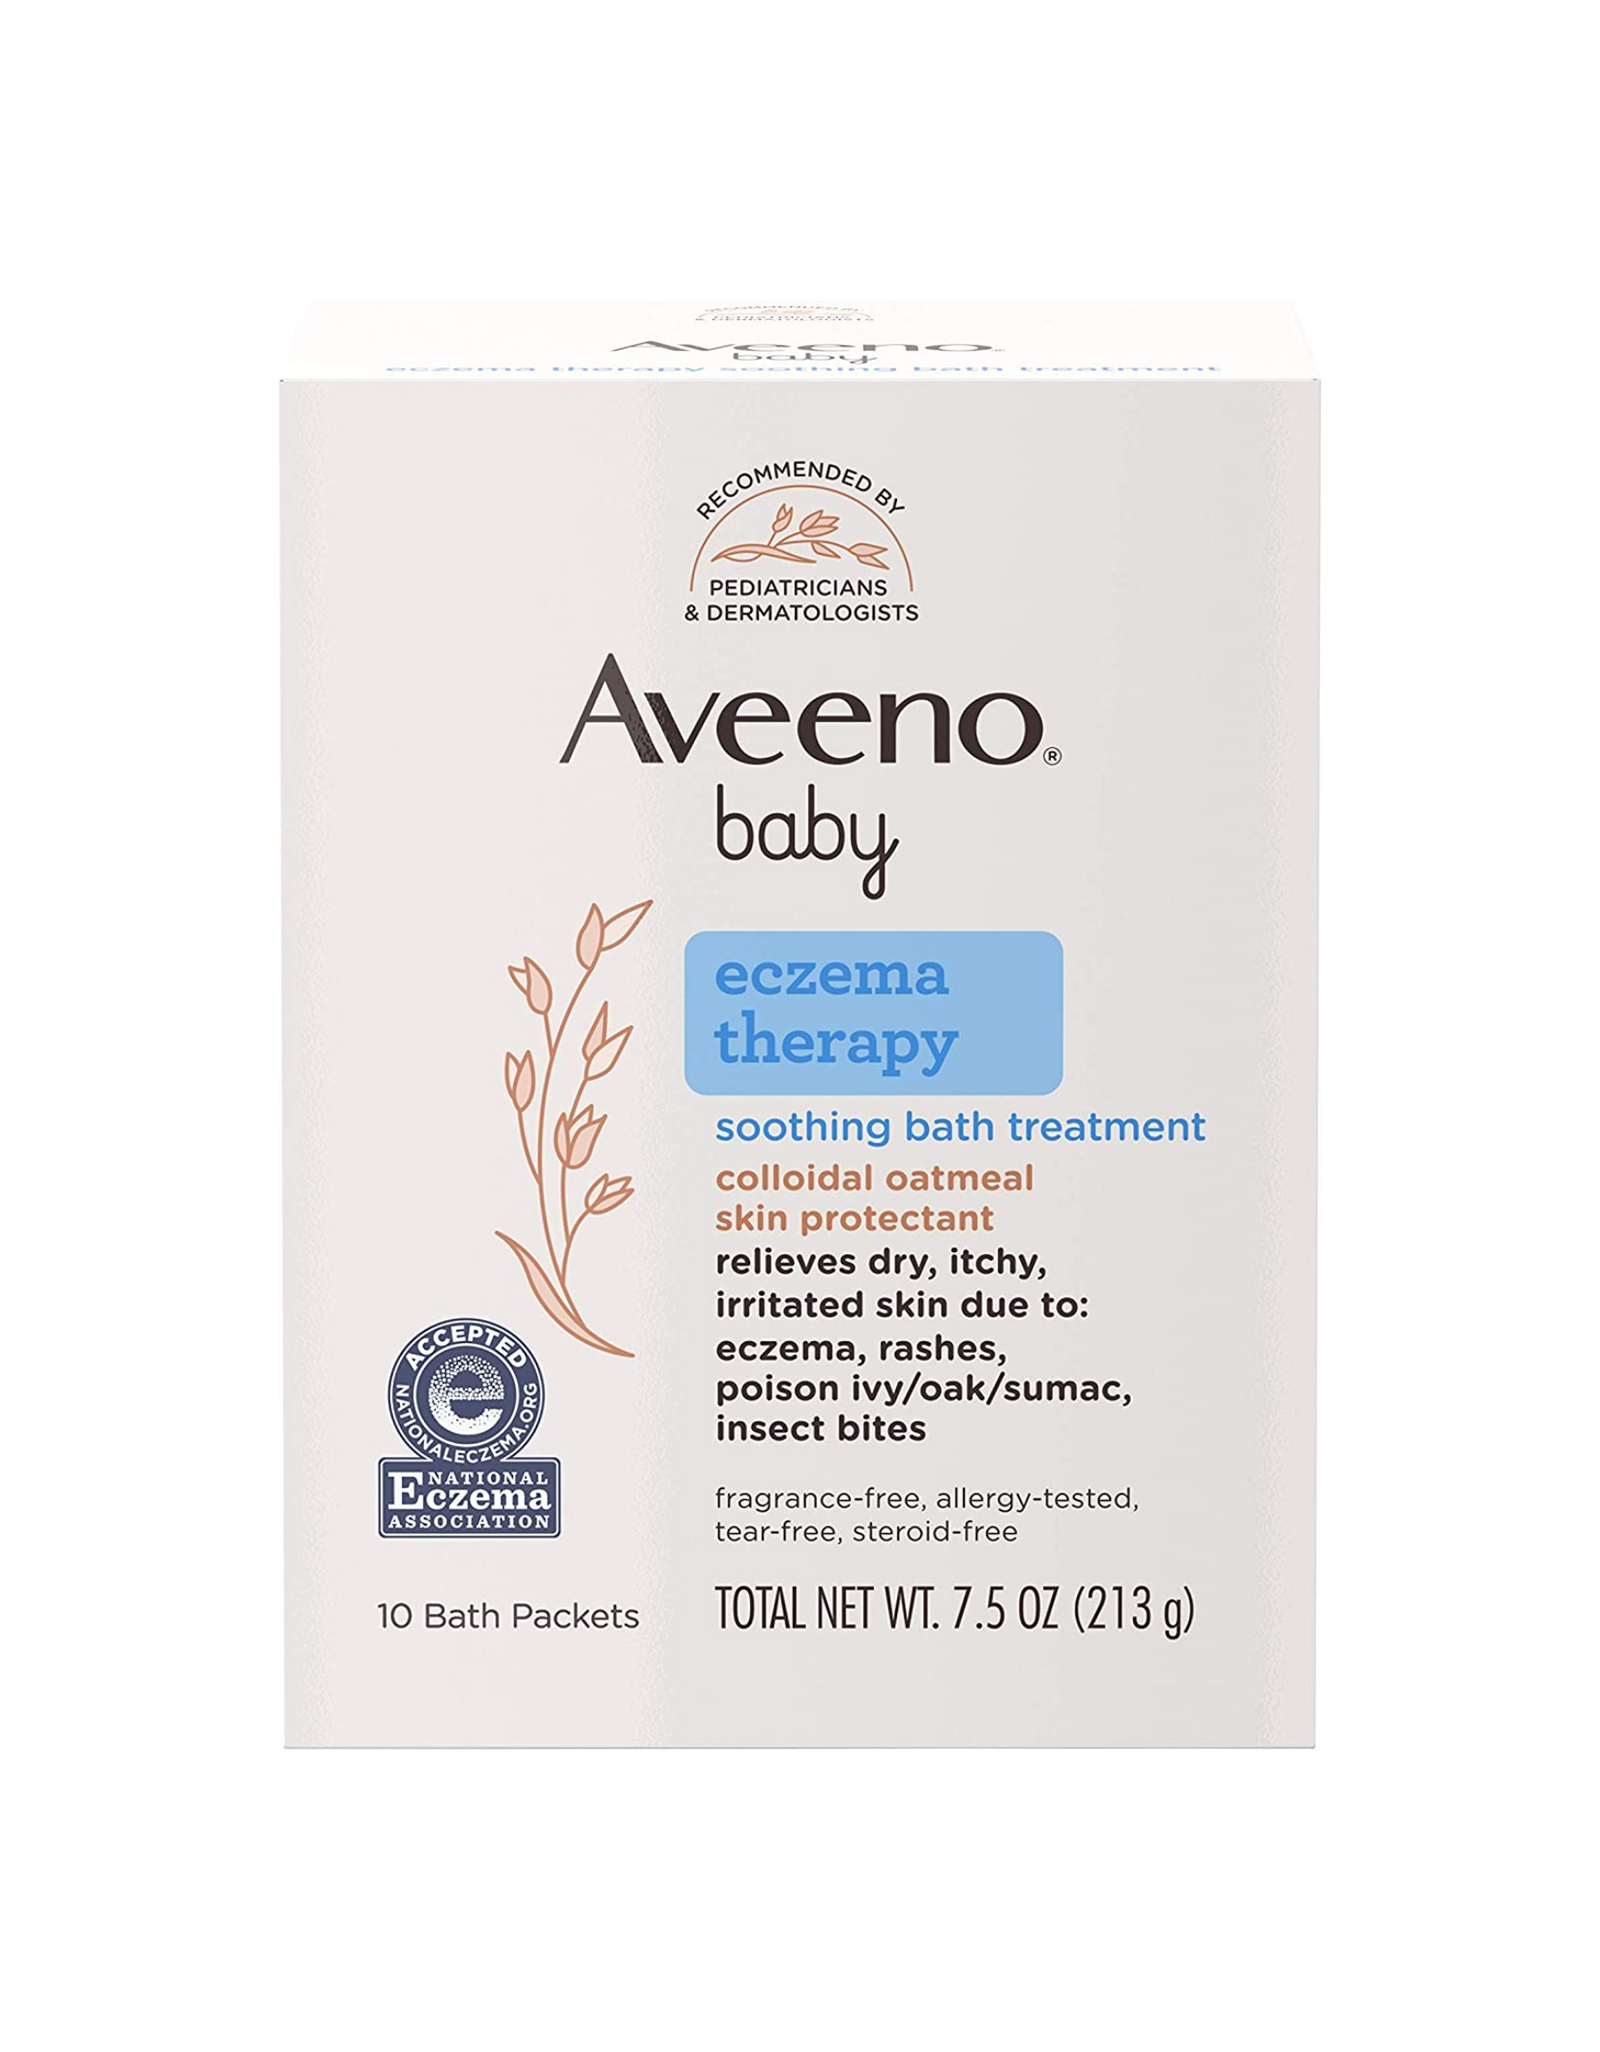 Aveeno Baby Eczema Therapy Soothing Bath Treatment for Relief of Dry, Itchy & Irritated Skin, with Natural Colloidal Oatmeal, 7.5 oz, 10 Ct